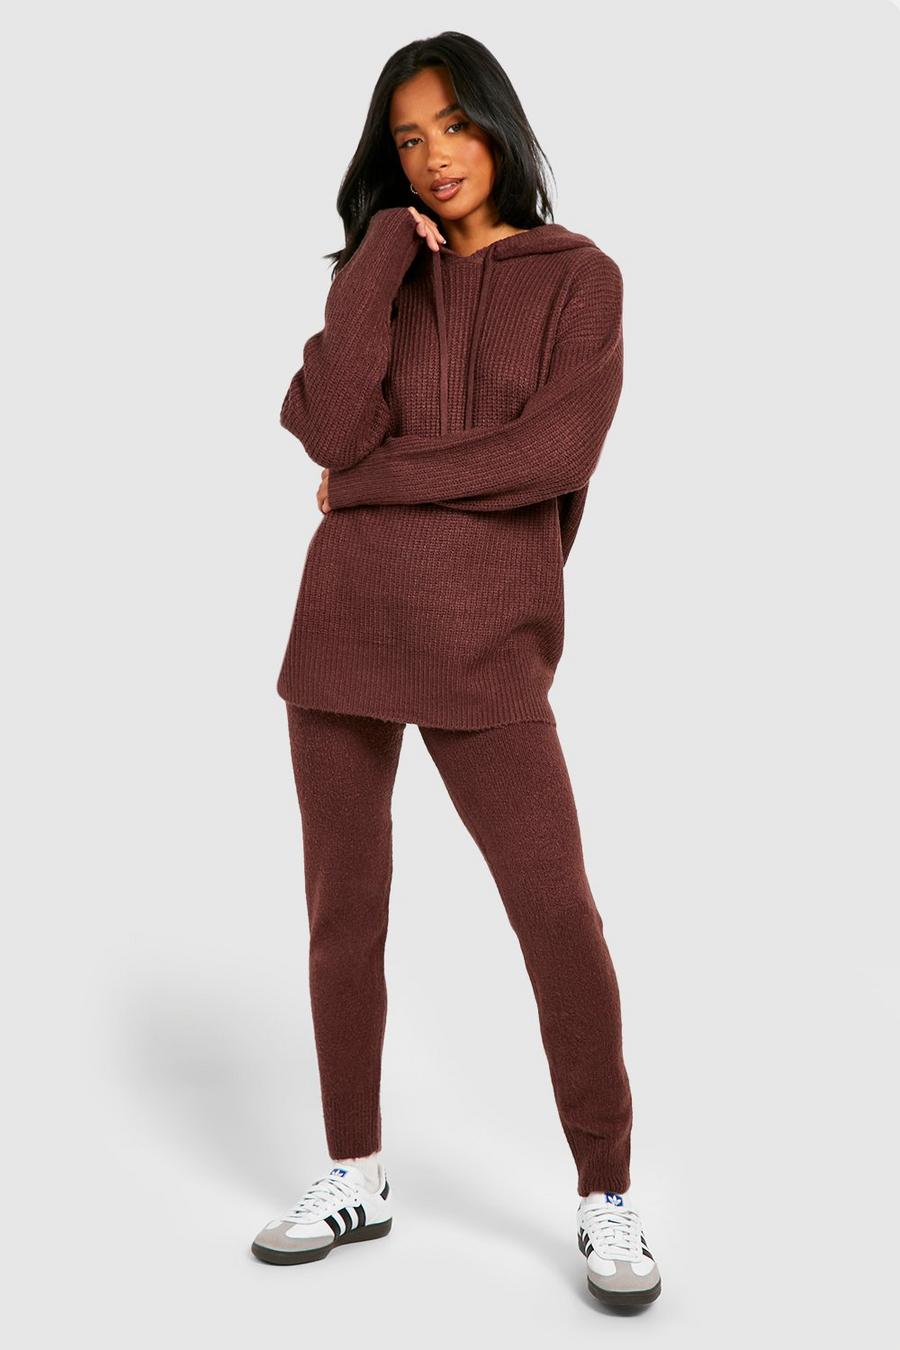 Chocolate Petite Soft Knit Hoodie Co-ord  